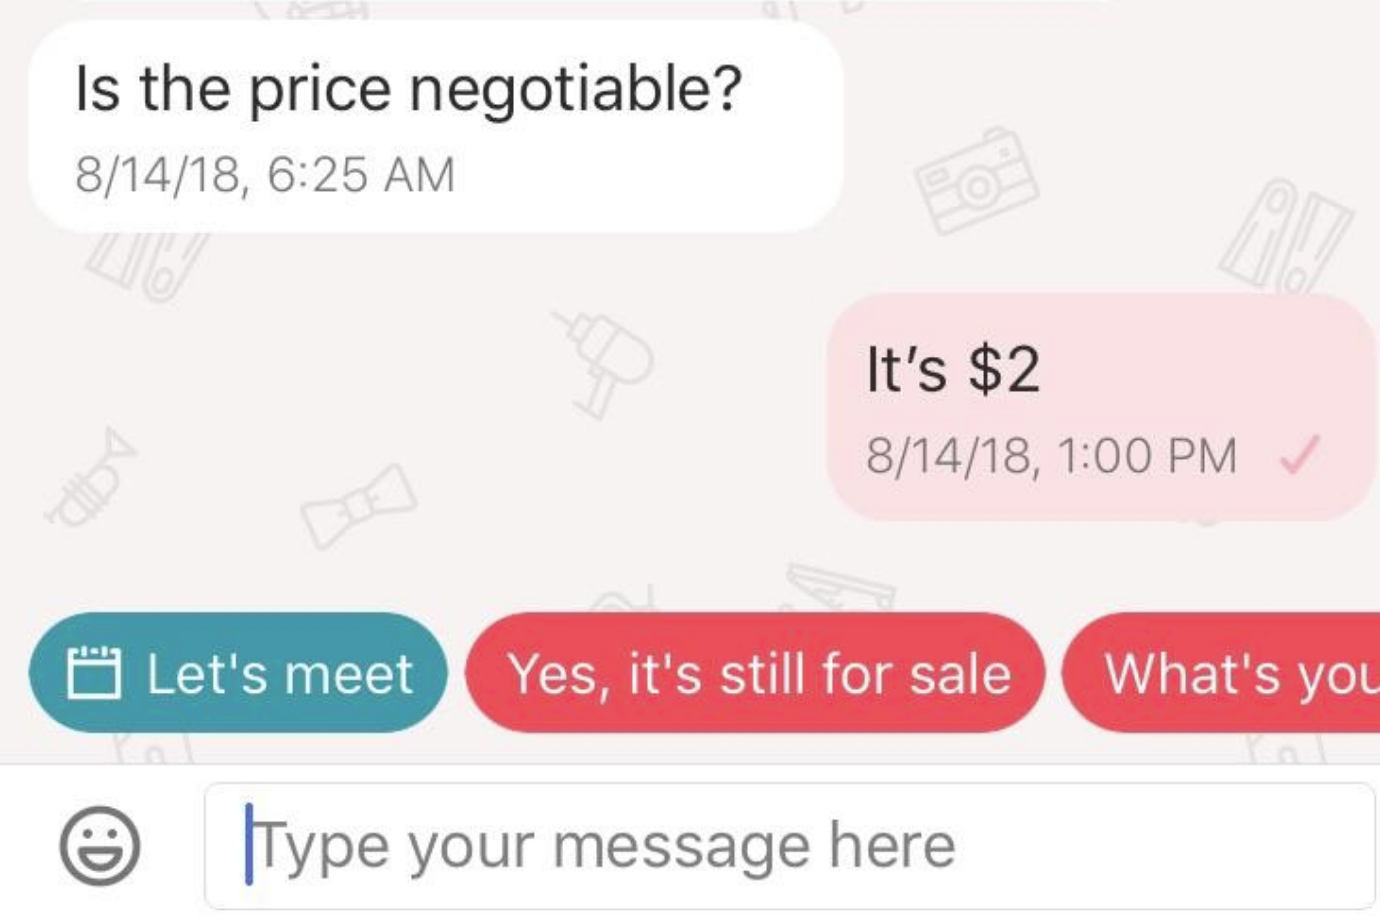 Type your message. Type your message here. Negotiate the Price. Your Type. Me your.